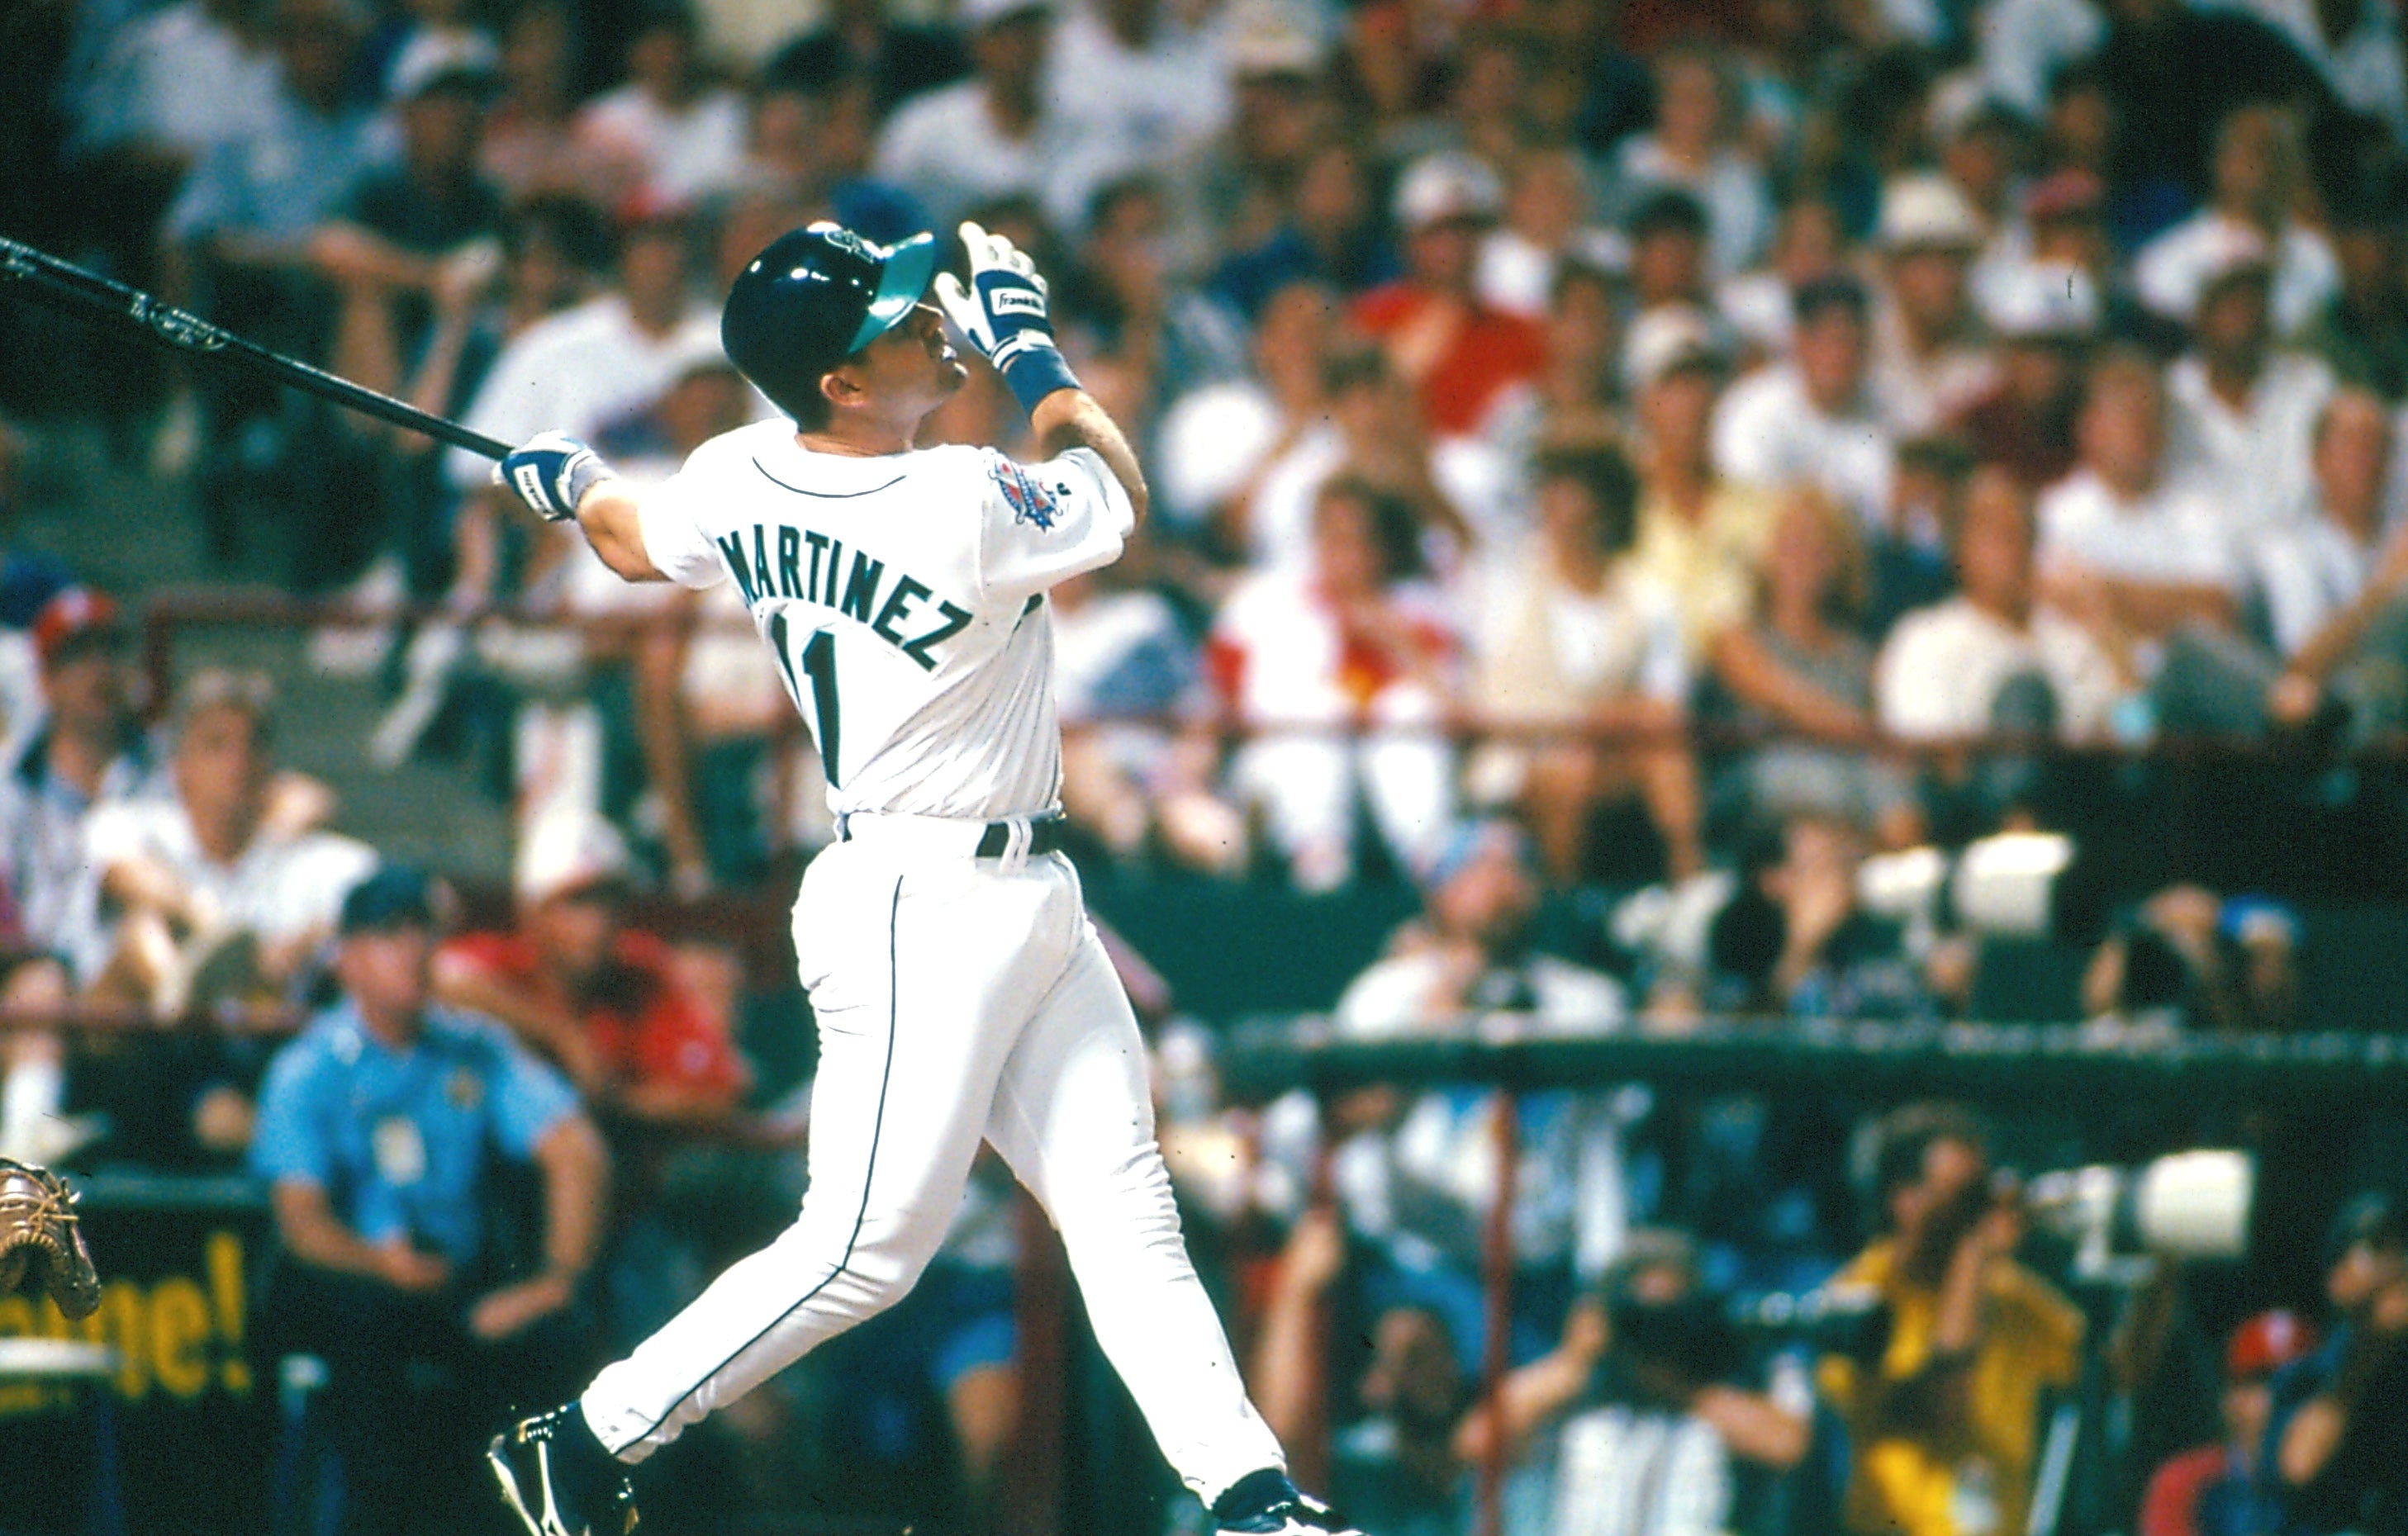 Martinez claims first place on Mariners’ all-time RBI list